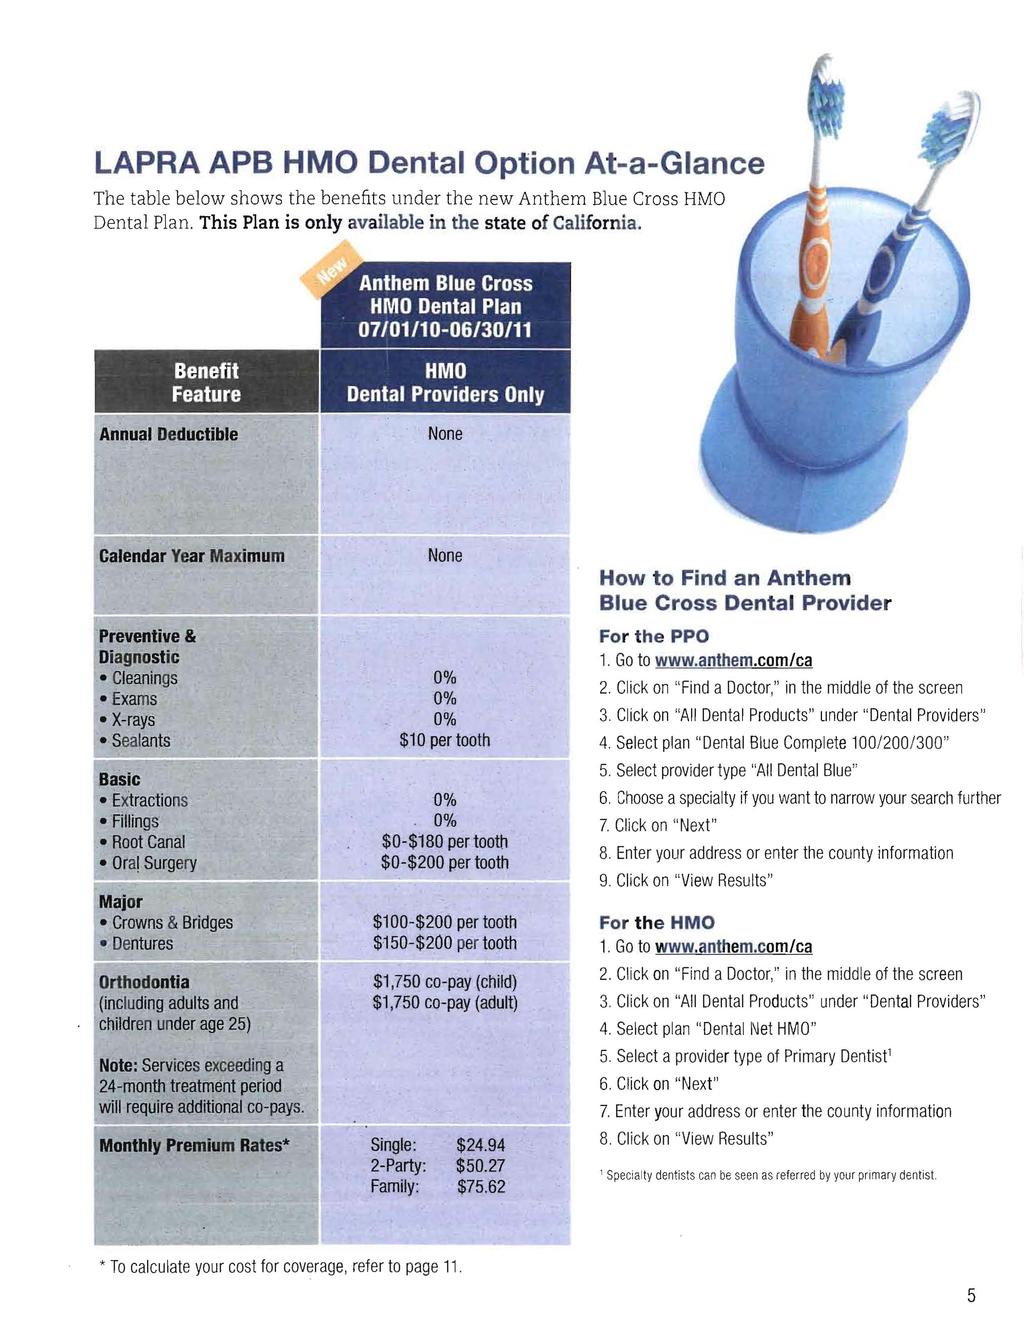 LAPRA APB HMO Dental Option At-a-Glance The table below shows the benefits under the new Anthem Blue Cross HMO Dental Plan. This Plan is only available in the state of California.